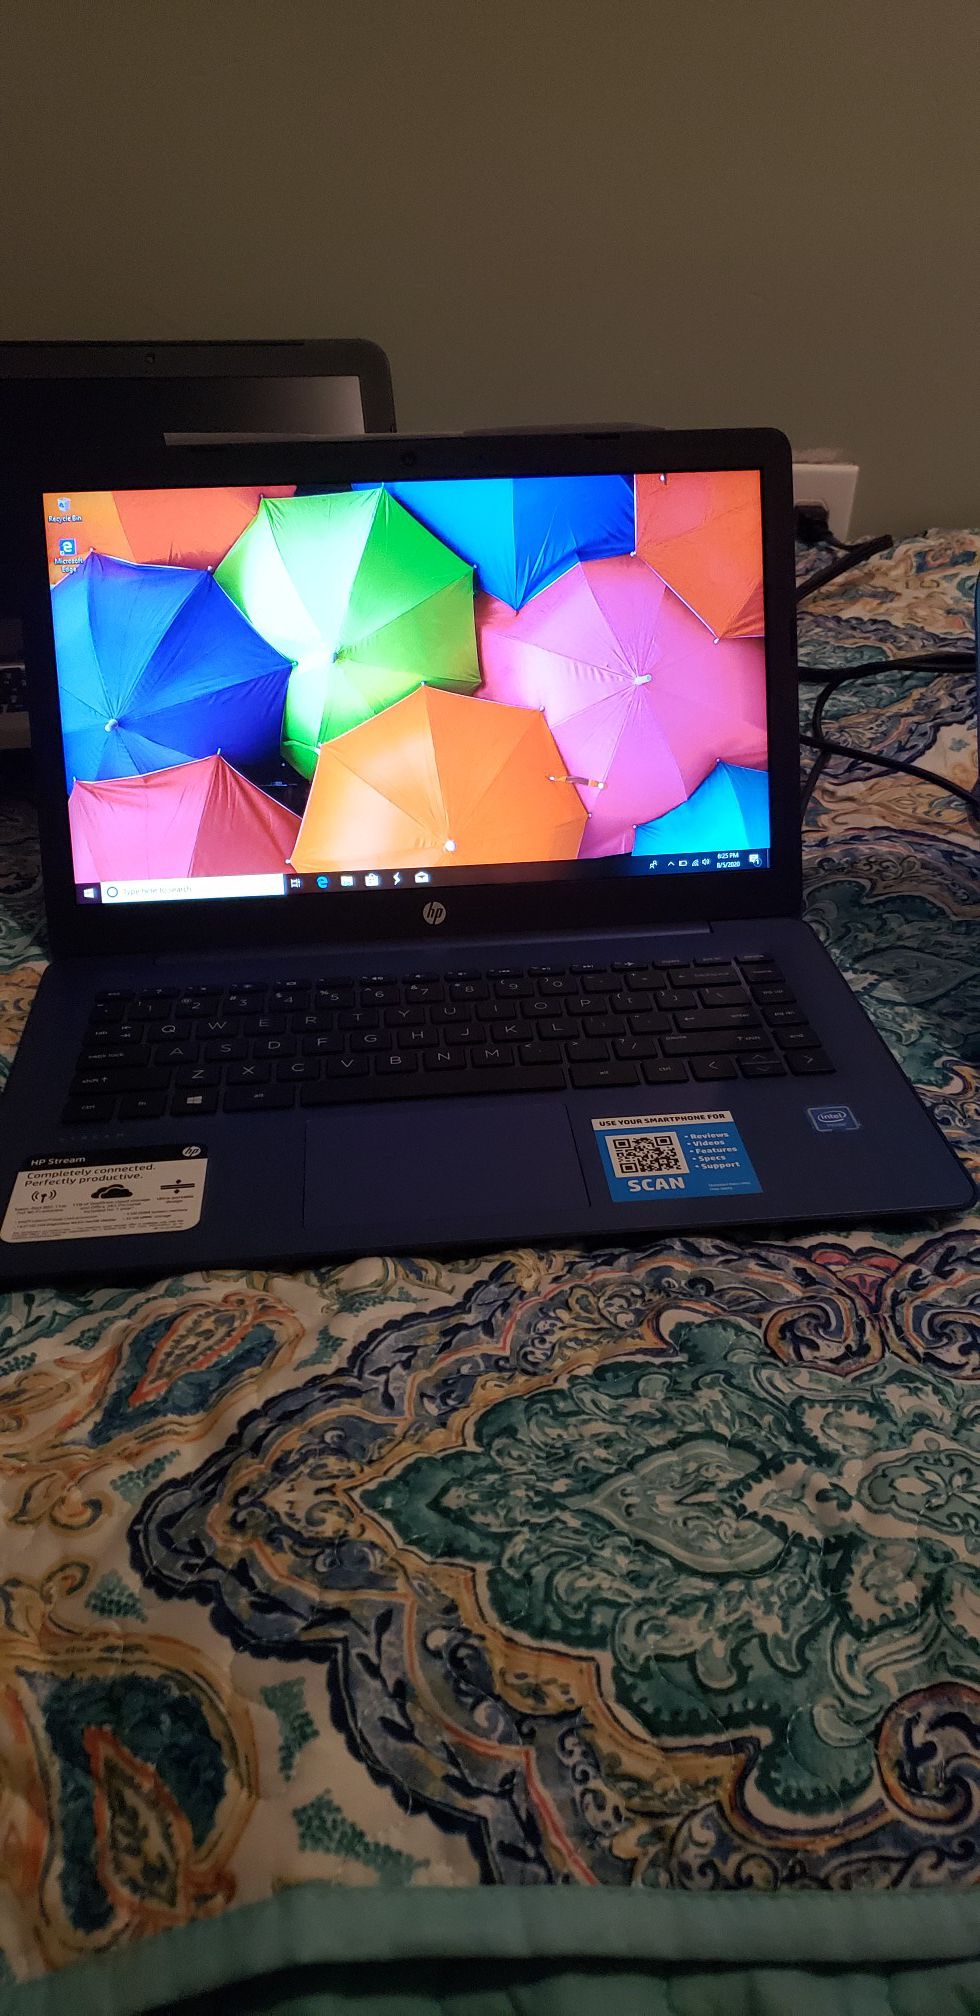 A BRAND NEW LAPTOP FOR SALE.